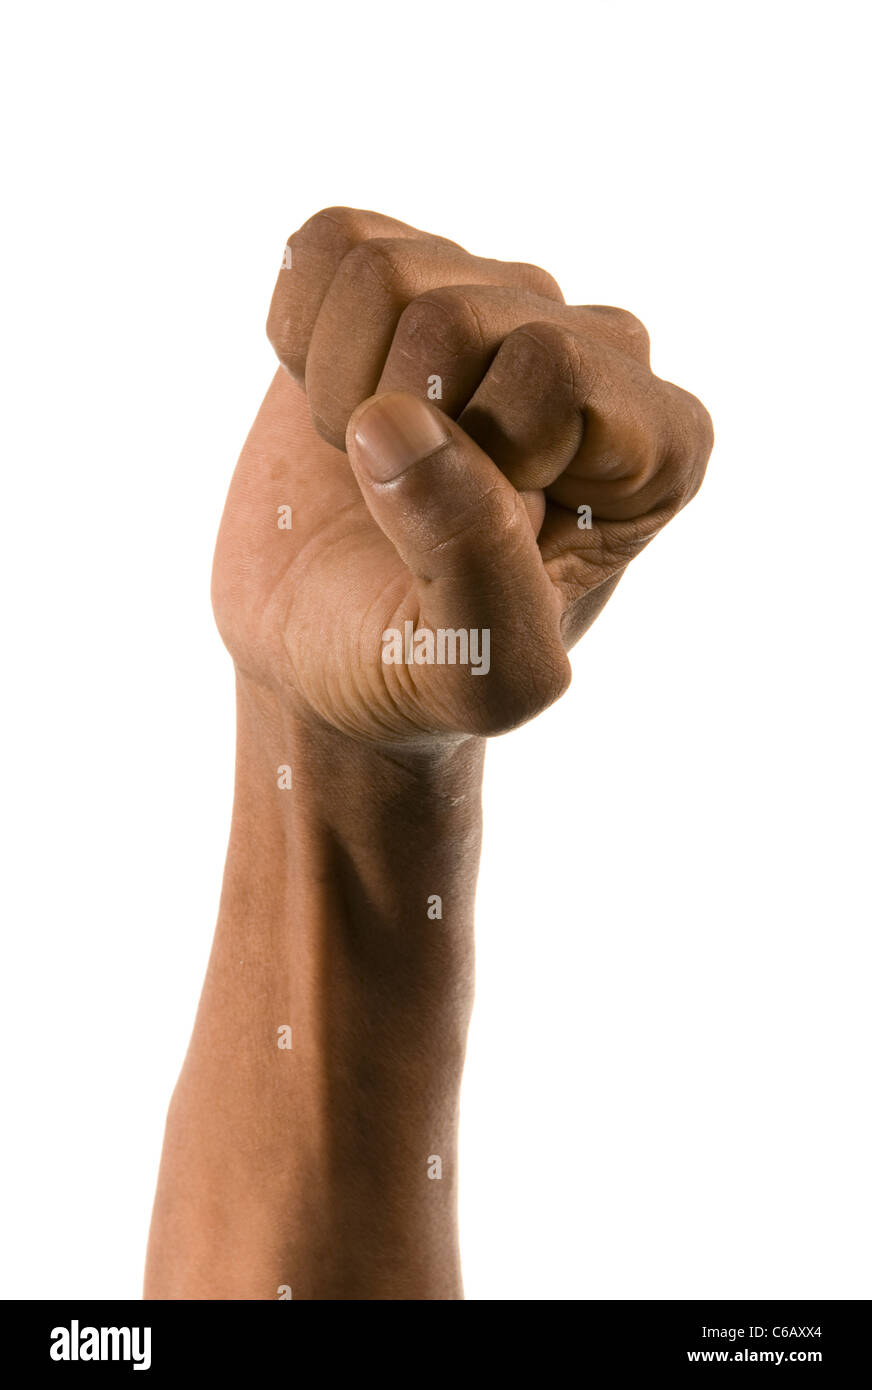 African's clenched fist in black power salute. Studio shot on white background. Stock Photo